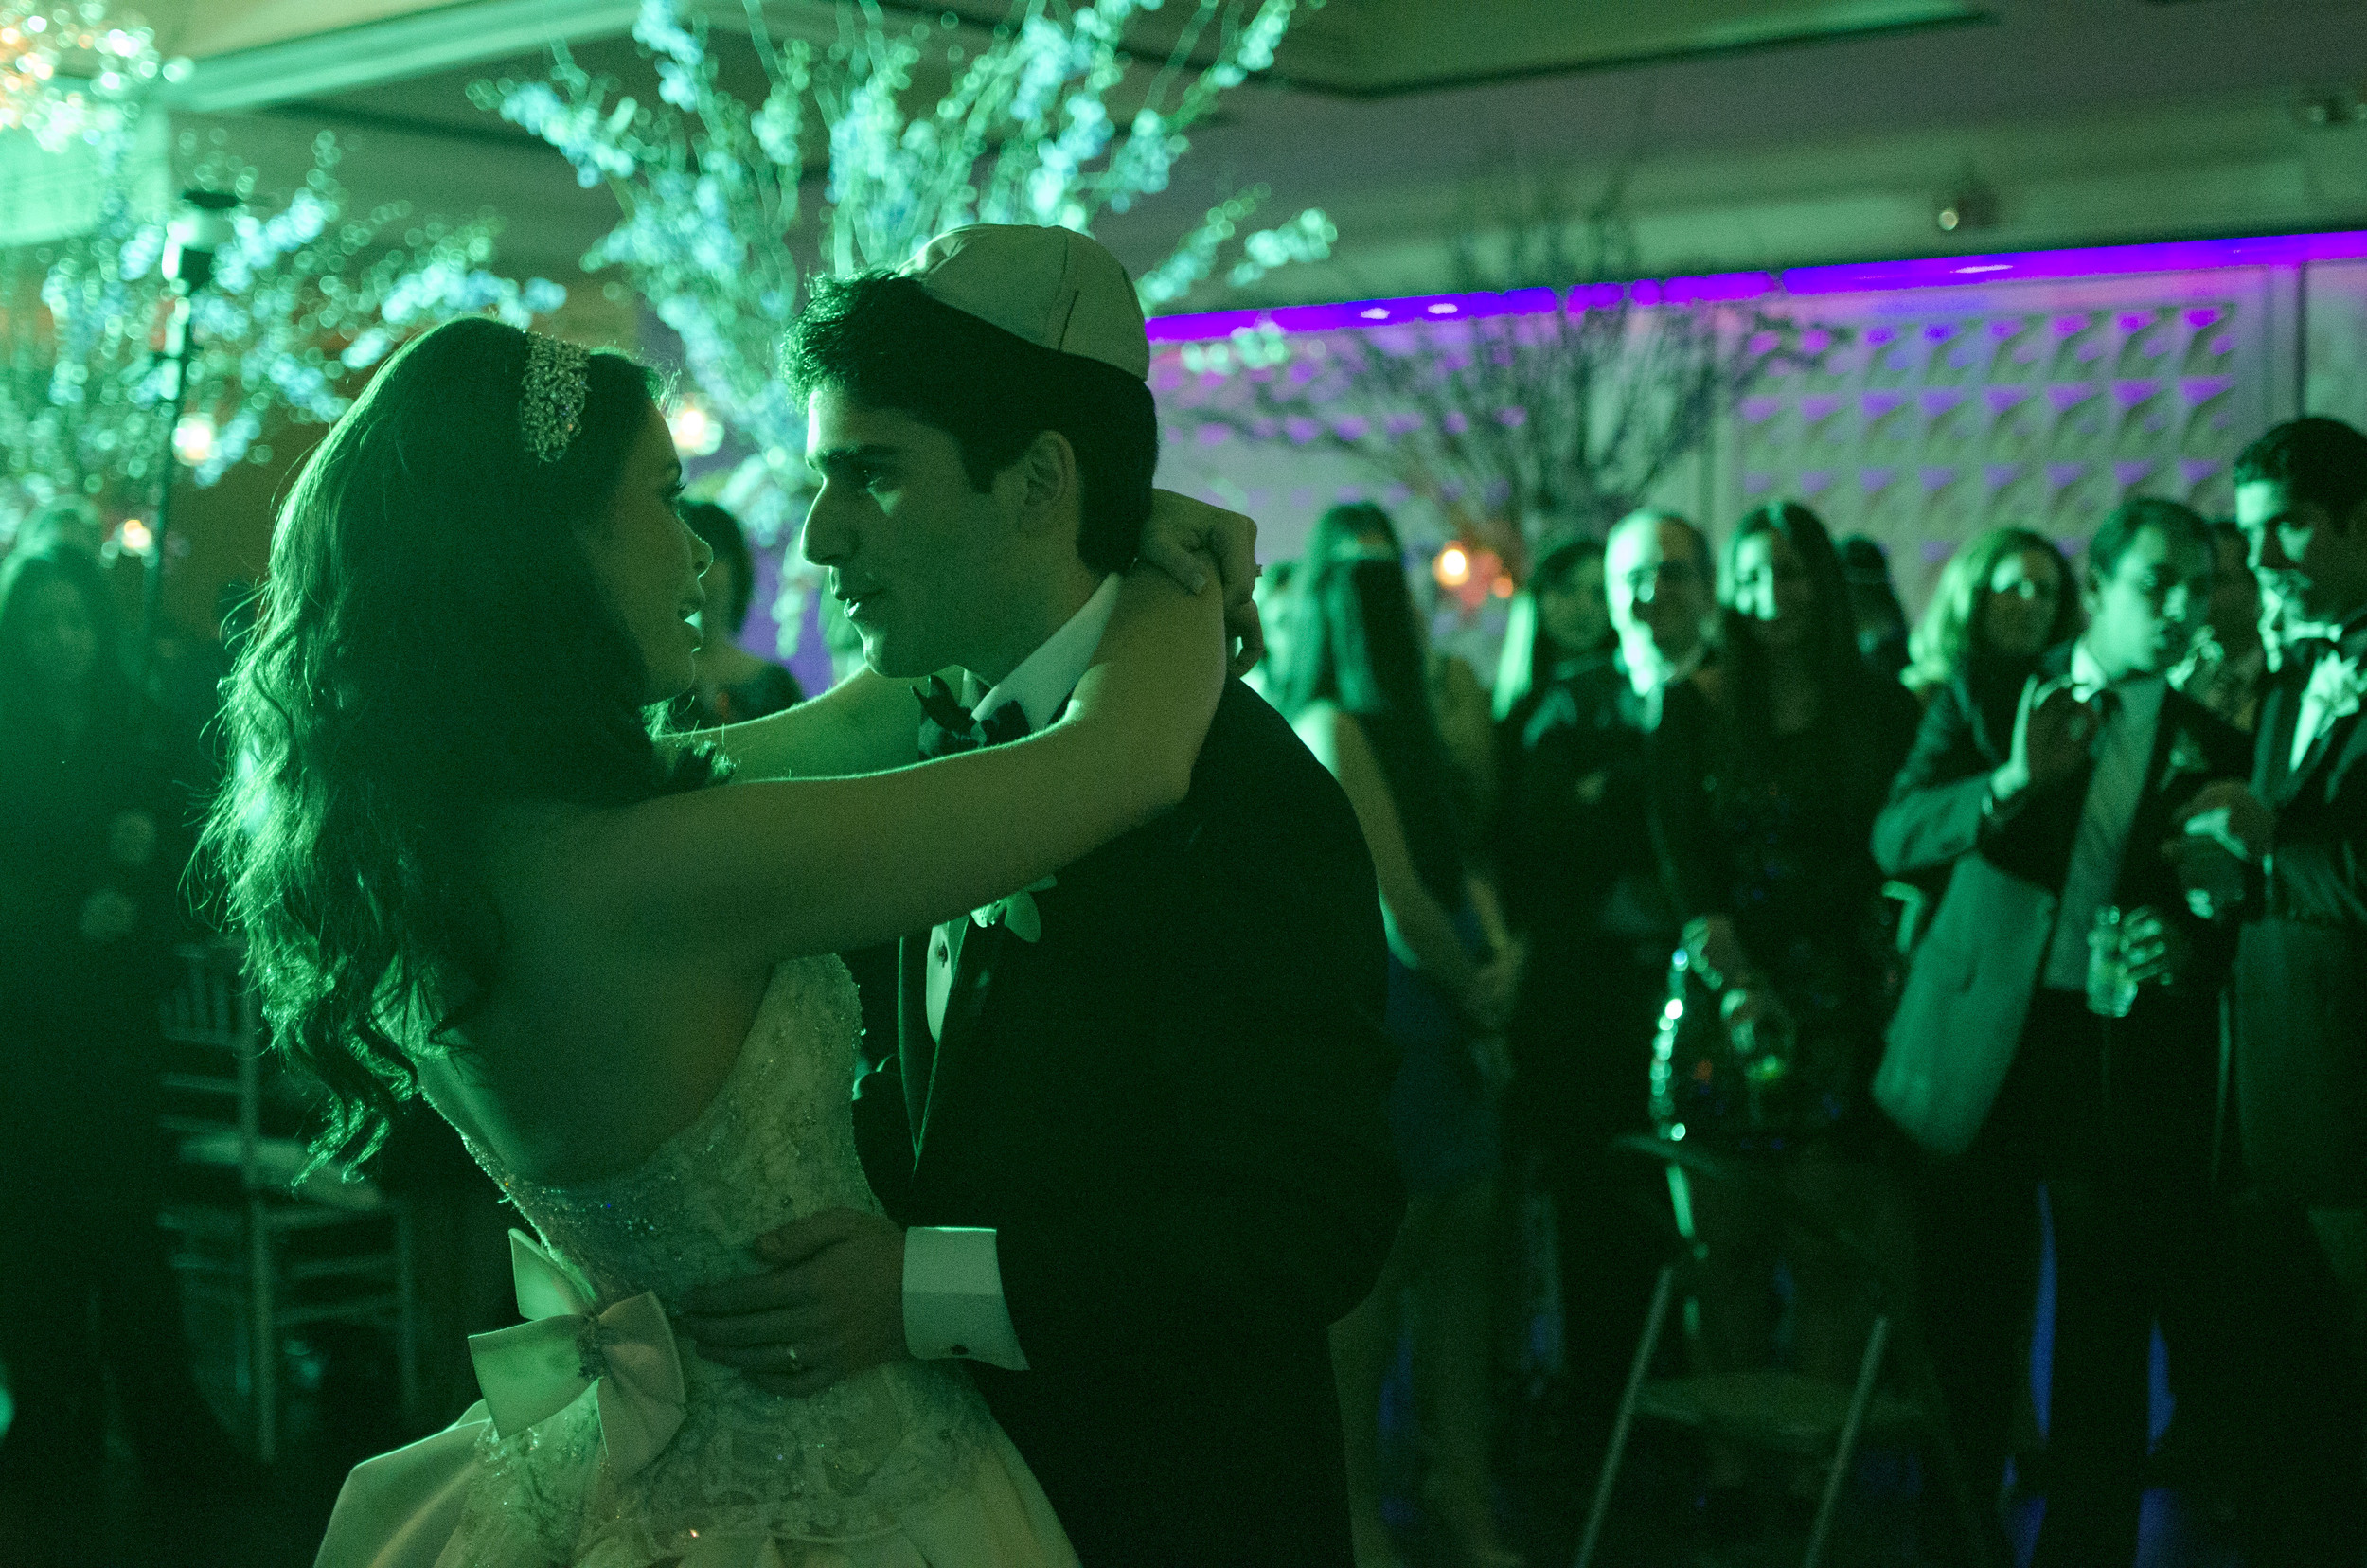  Steven Pahuskin and his new bride, Jaclyn share in their first dance as husband and wife.&nbsp; 